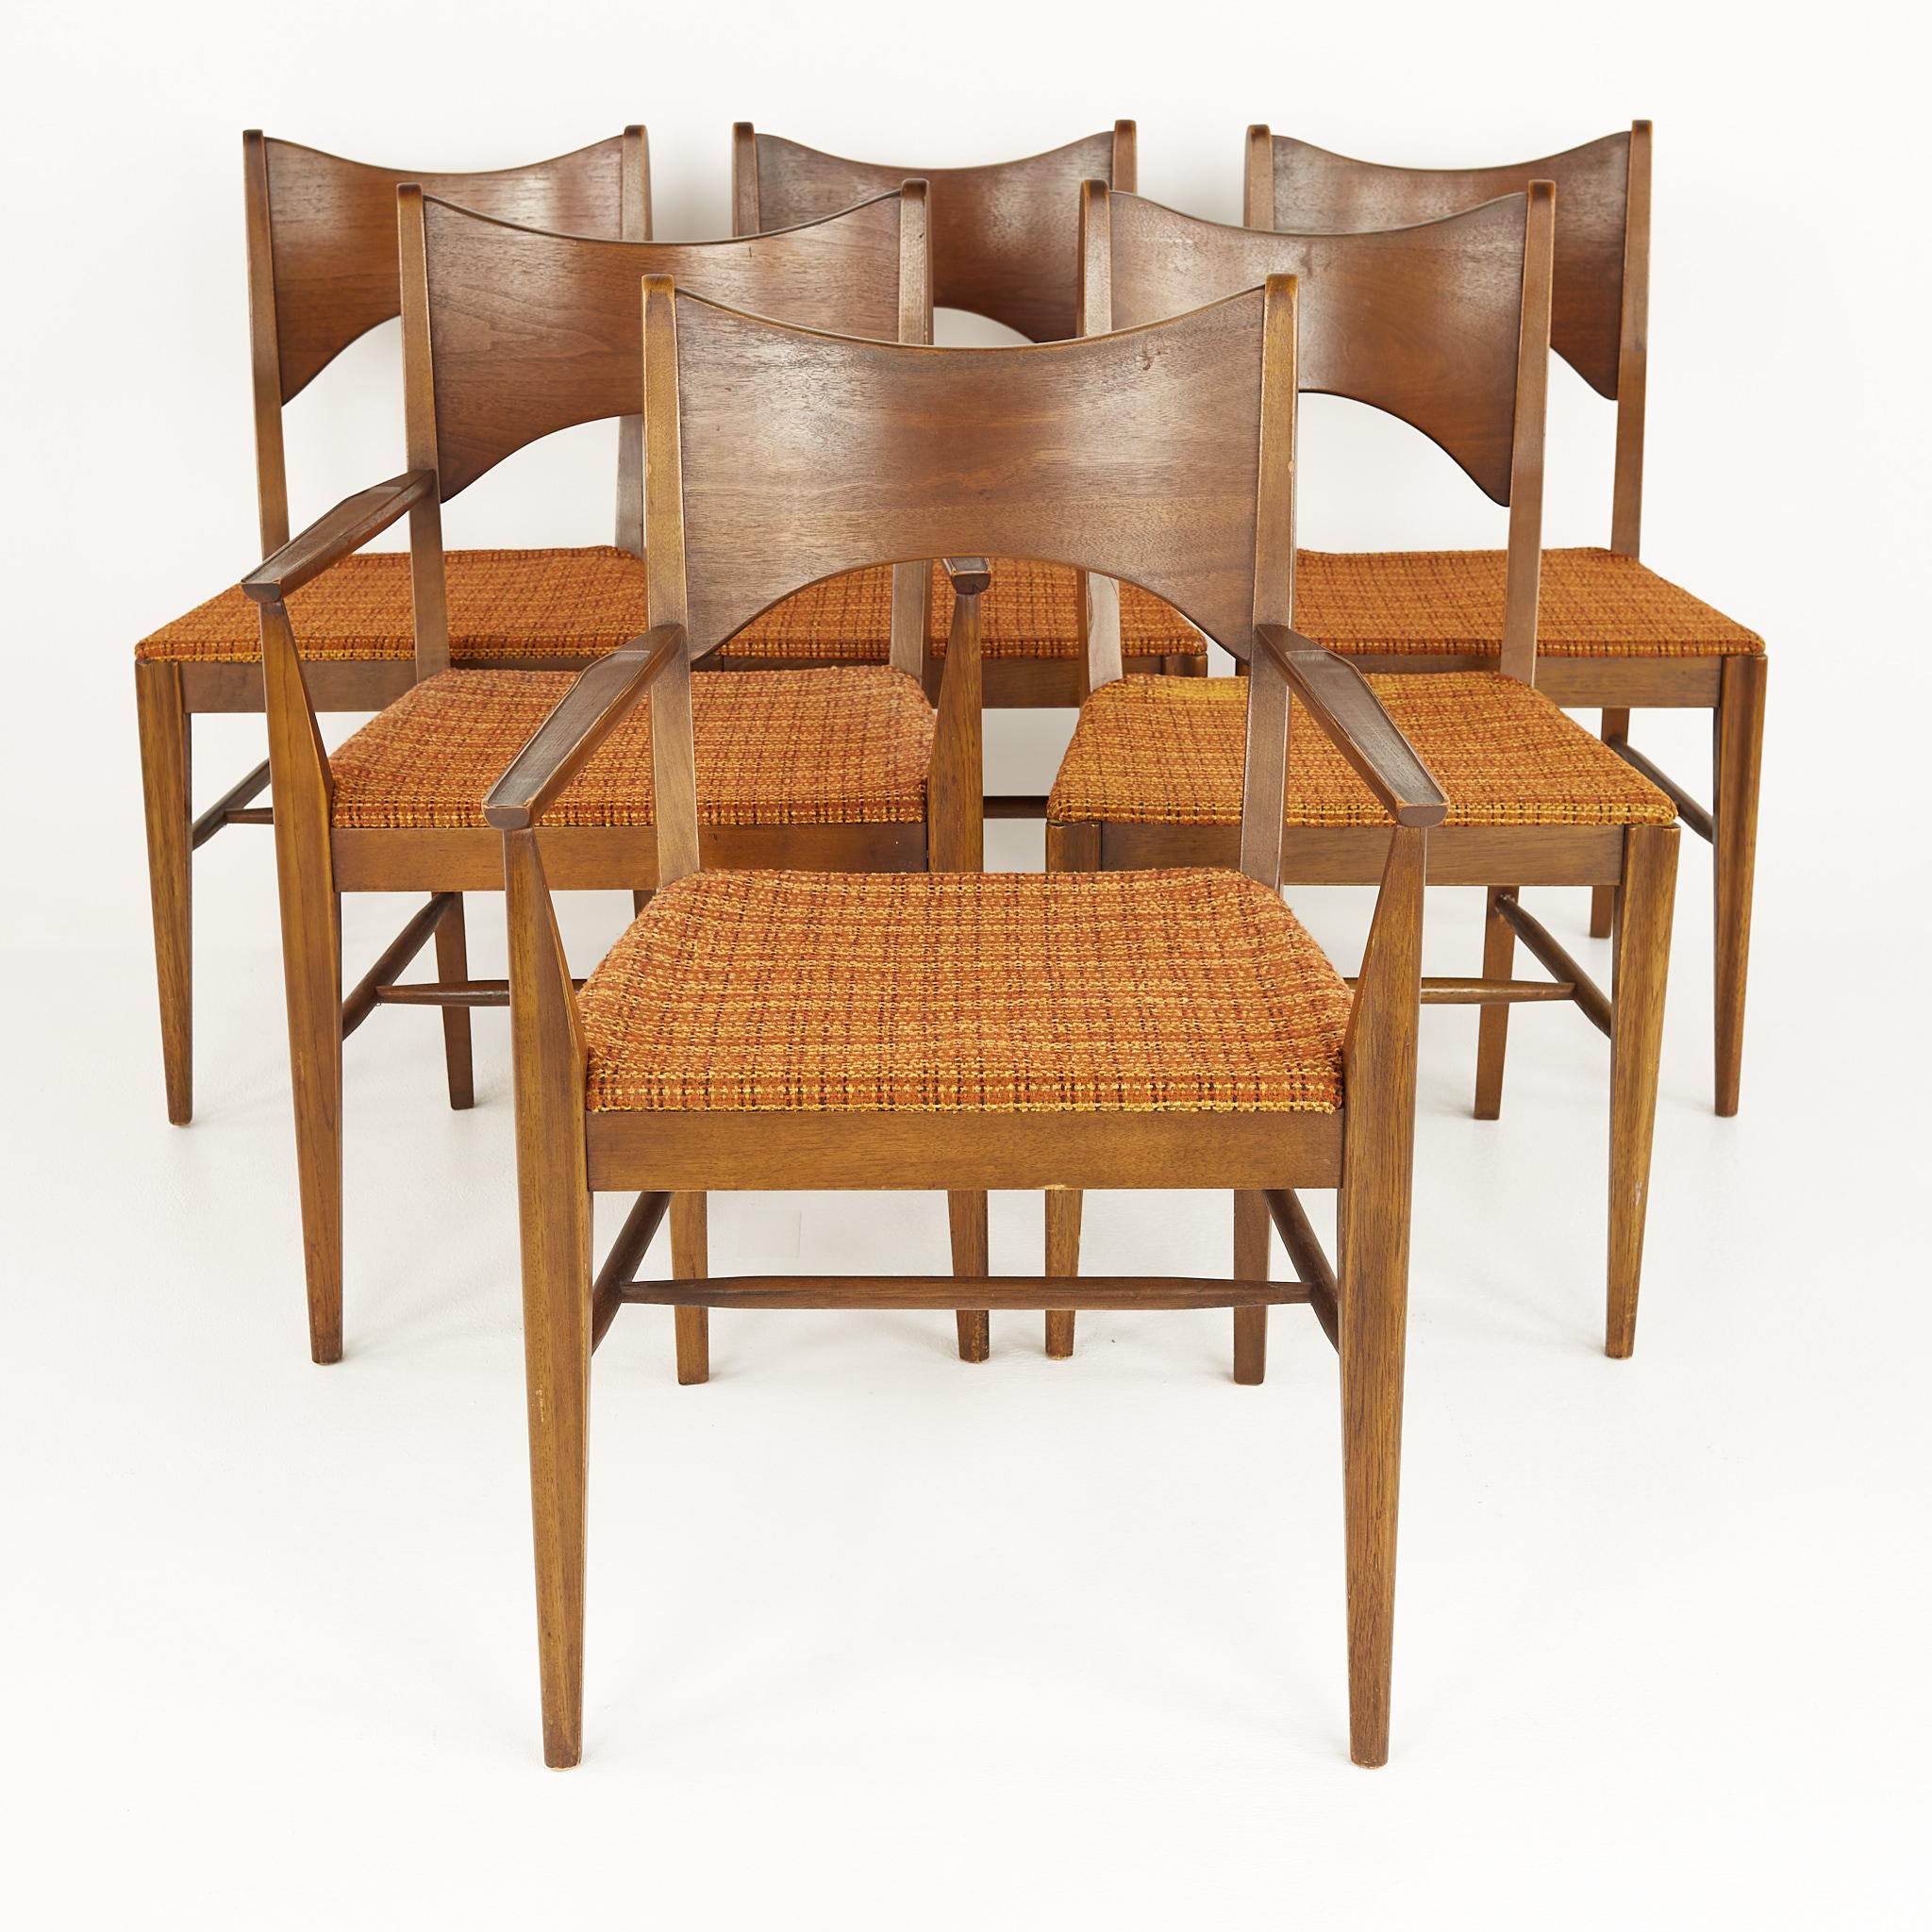 Broyhill saga mid century walnut dining chairs - set of 6

These chairs measure: 22 wide x 23.25 deep x 34 inches high, with a seat height of 18 and arm height of 25.25 inches

?All pieces of furniture can be had in what we call restored vintage